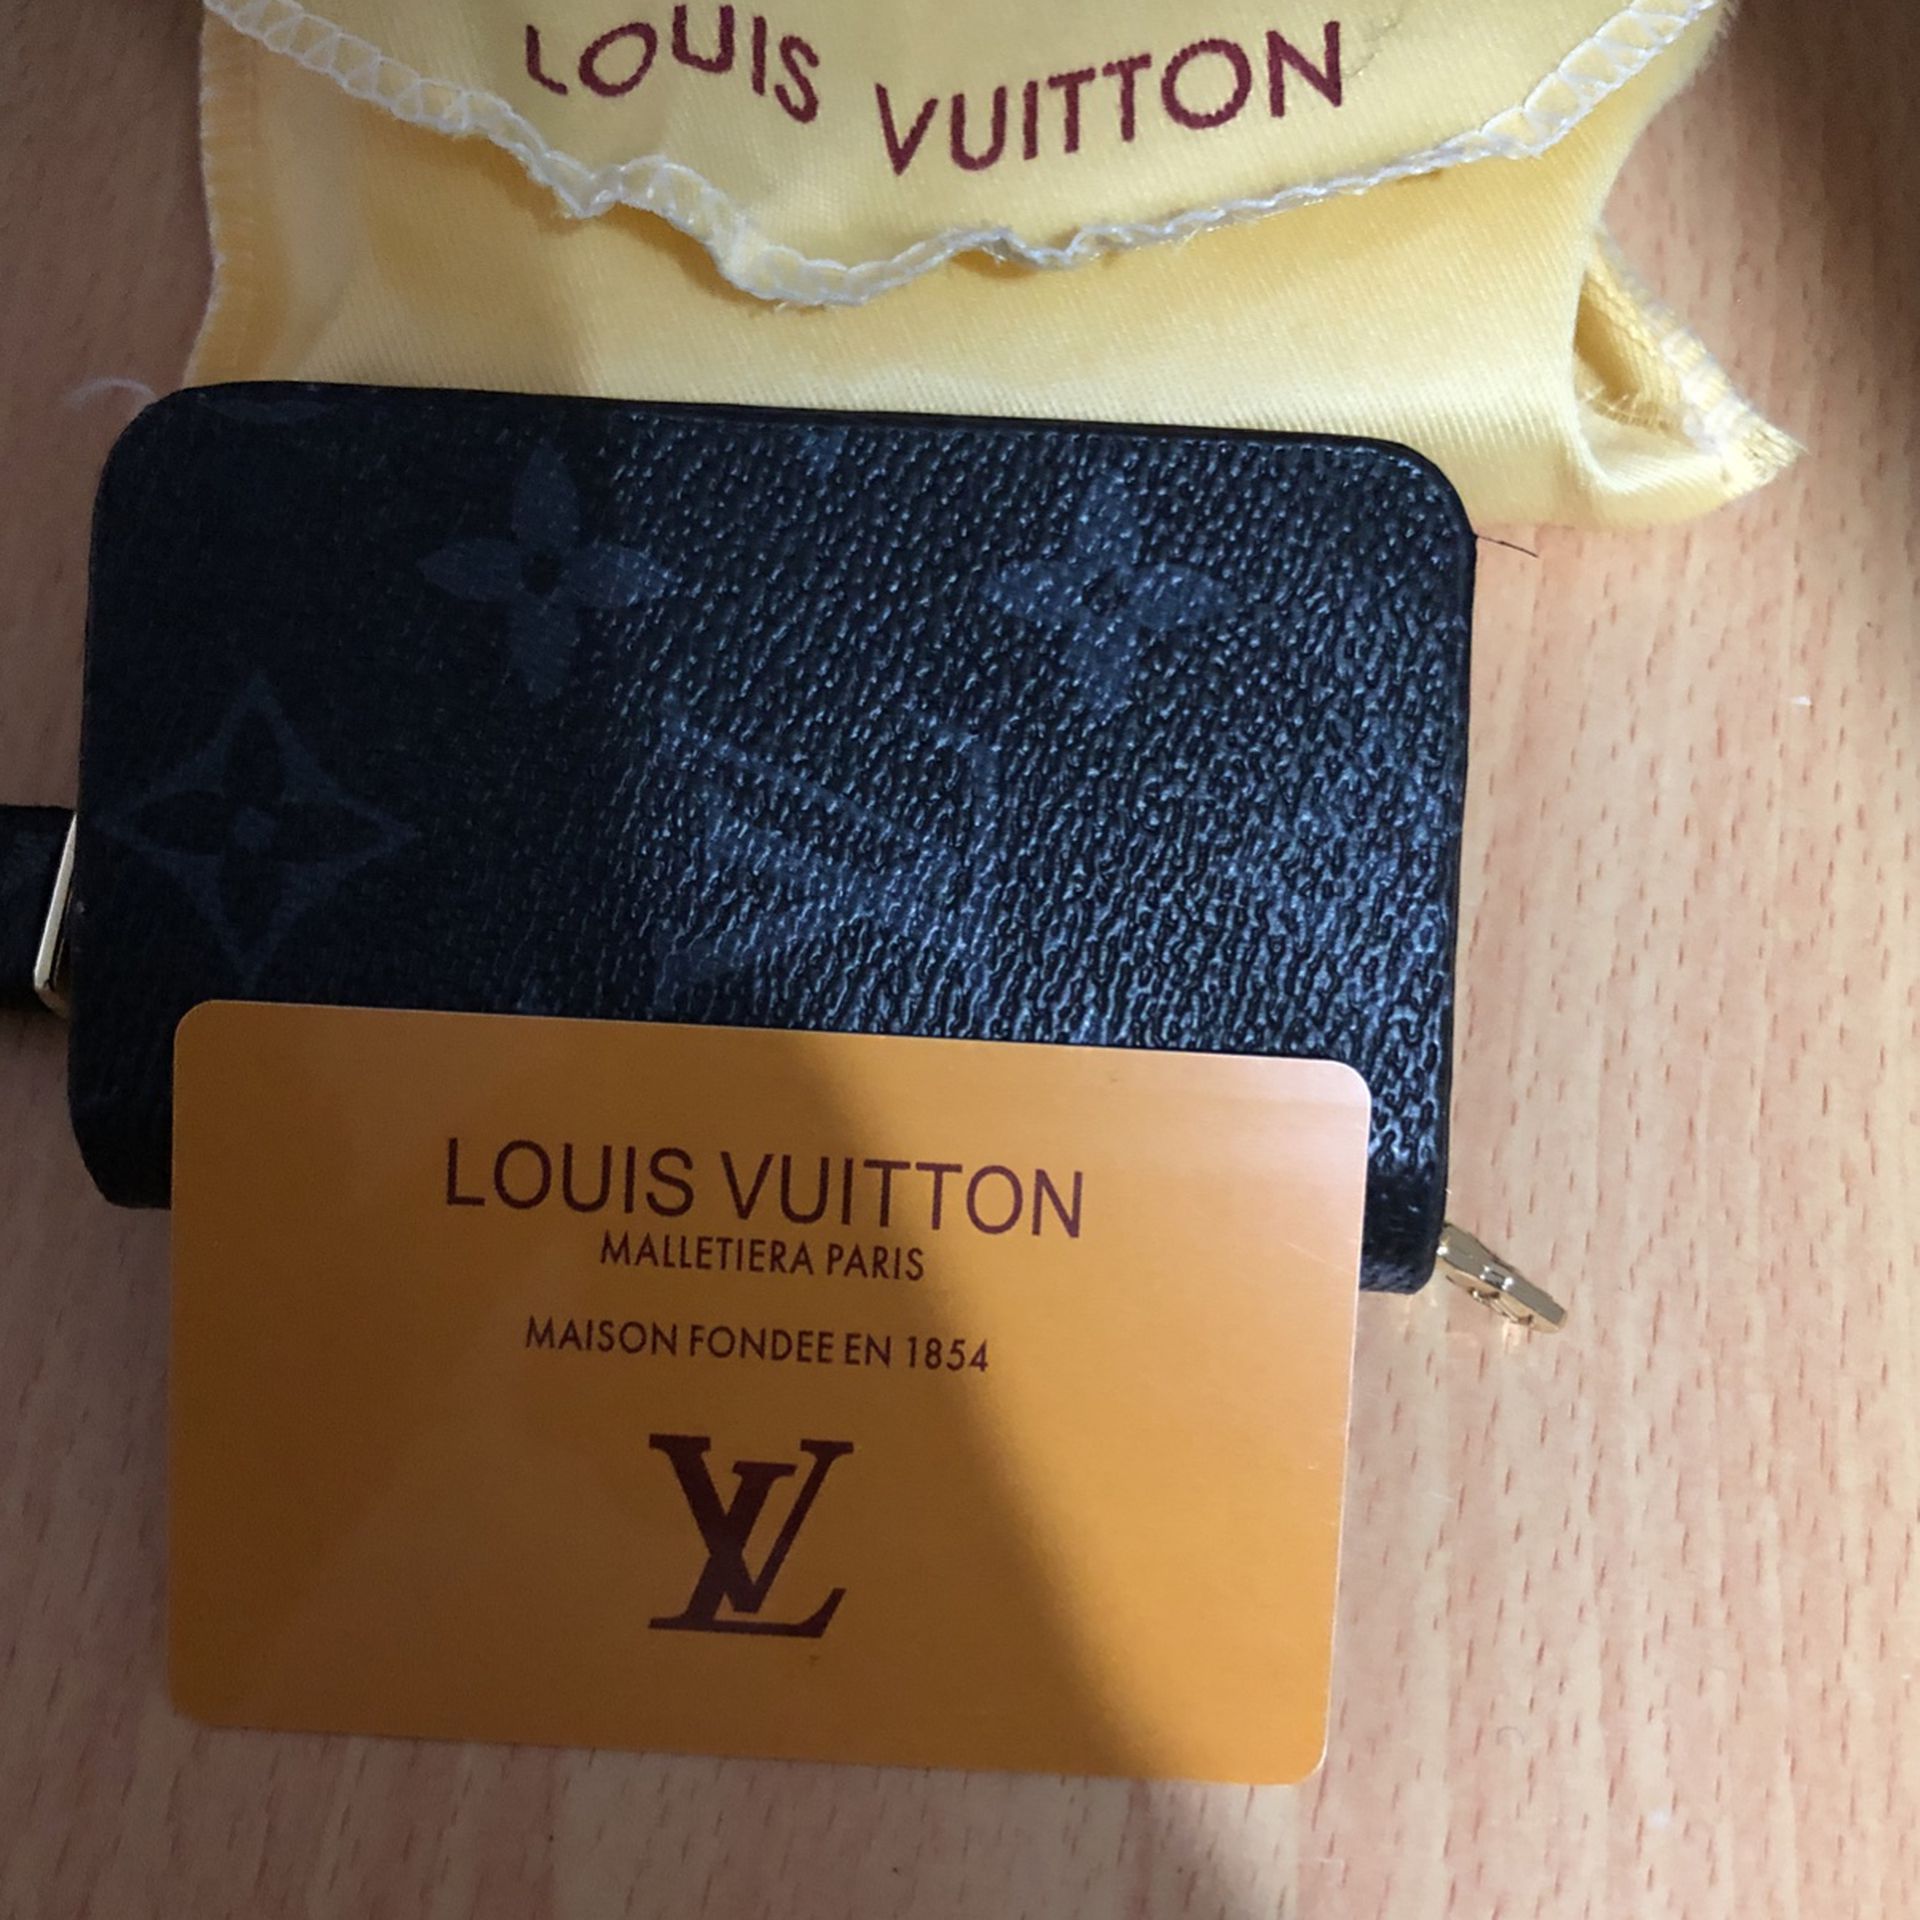 Louis Vuitton Key chain Lighter for Sale in Westchester, IL - OfferUp